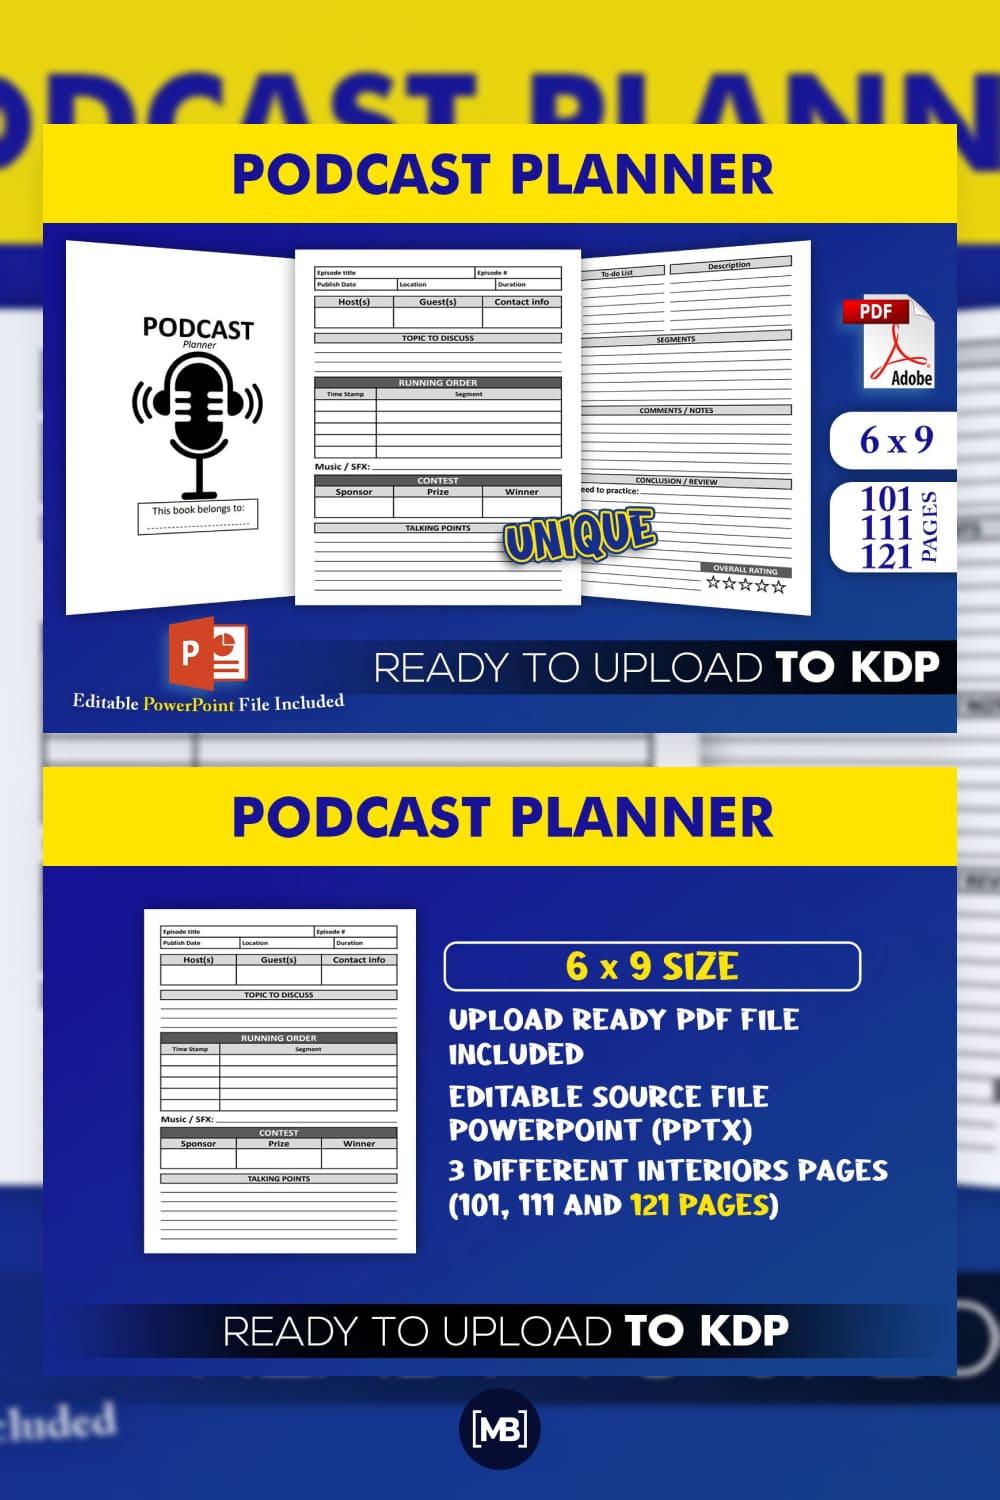 Podcast planner powerpoint template.